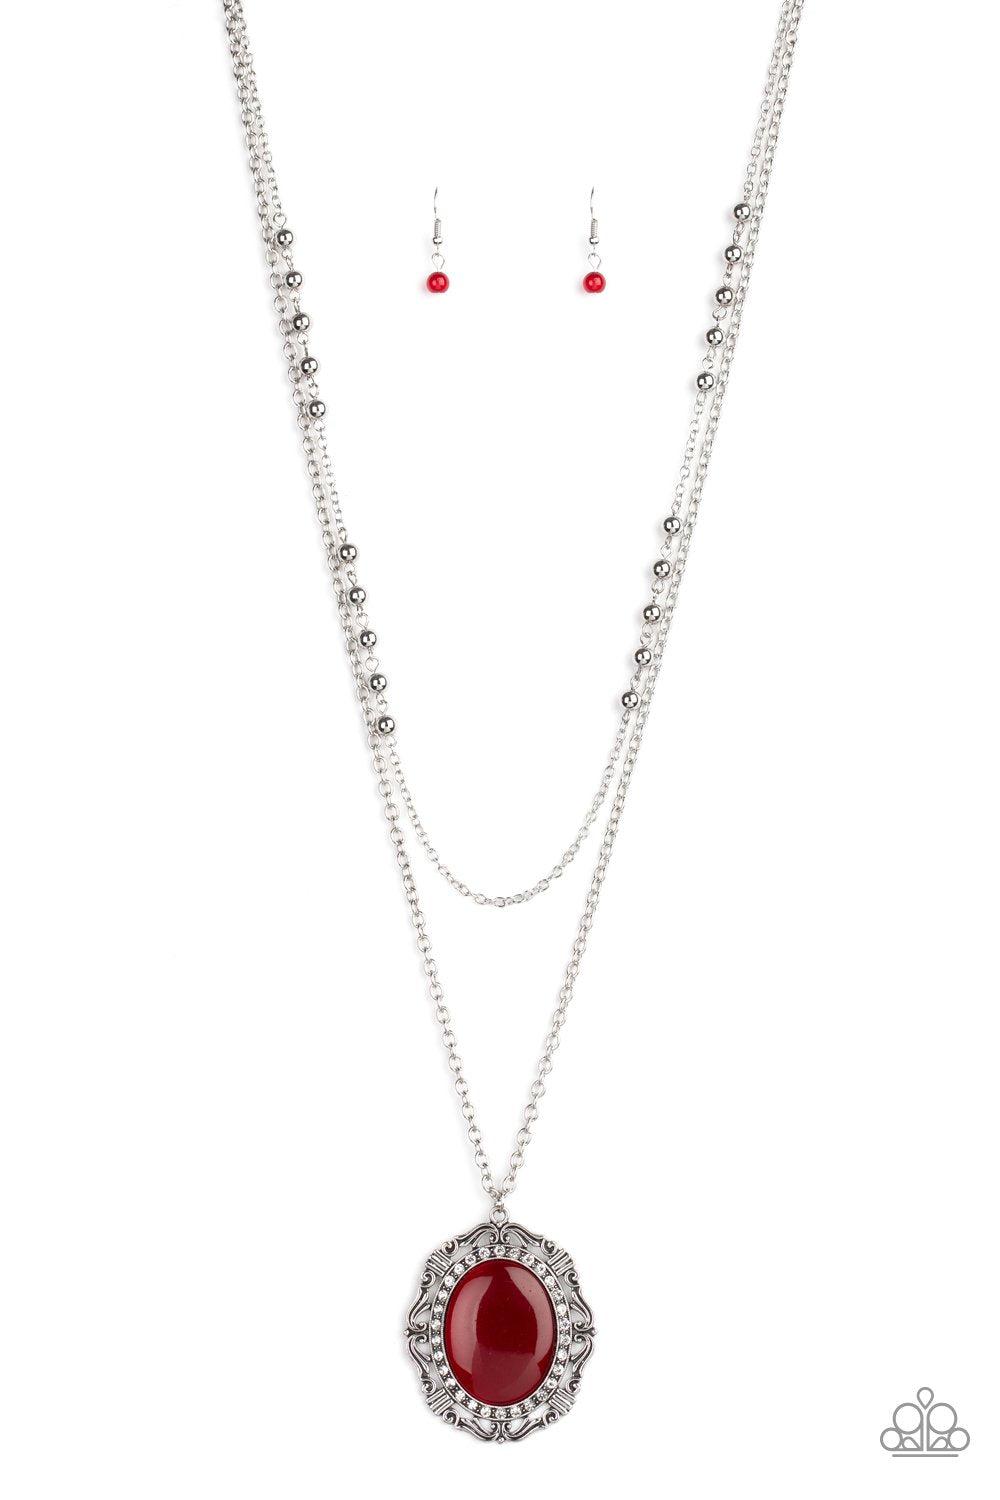 Endlessly Enchanted Red Cat's Eye Stone Necklace - Paparazzi Accessories-CarasShop.com - $5 Jewelry by Cara Jewels